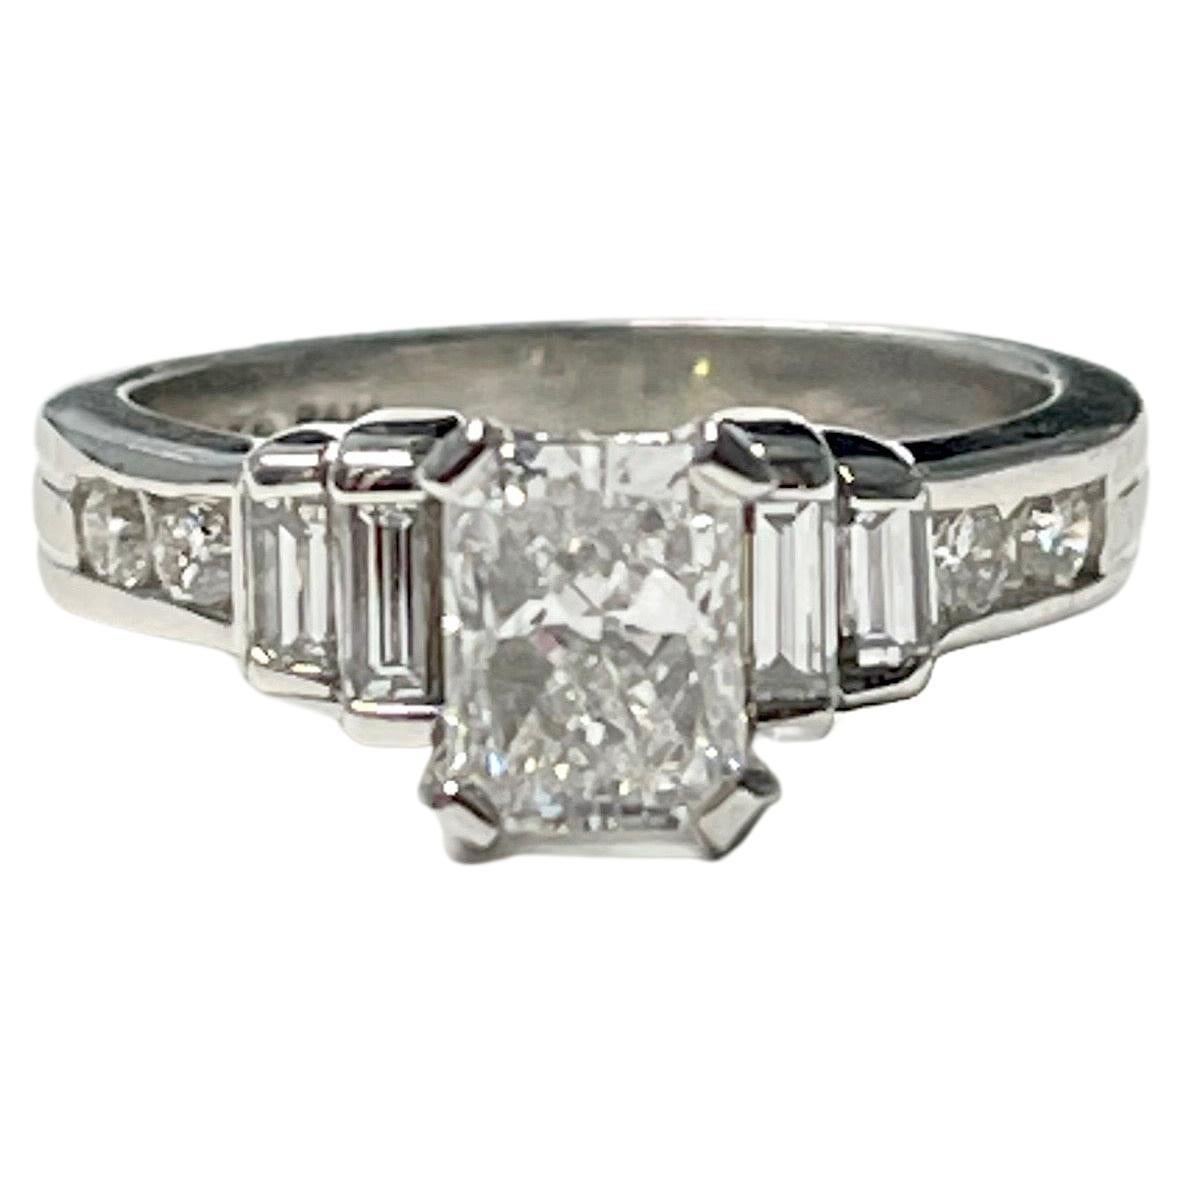 GIA certified 1.23 carat radiant cut diamond engagement ring handcrafted in platinum.
The details are as follows : 
Radiant cut diamond : 1.23 carat ( F color and SI2 clarity ) 
Diamond weight : 0.50 carat 
Measurements : 6.76x5.09x3.98 mm 
Ring